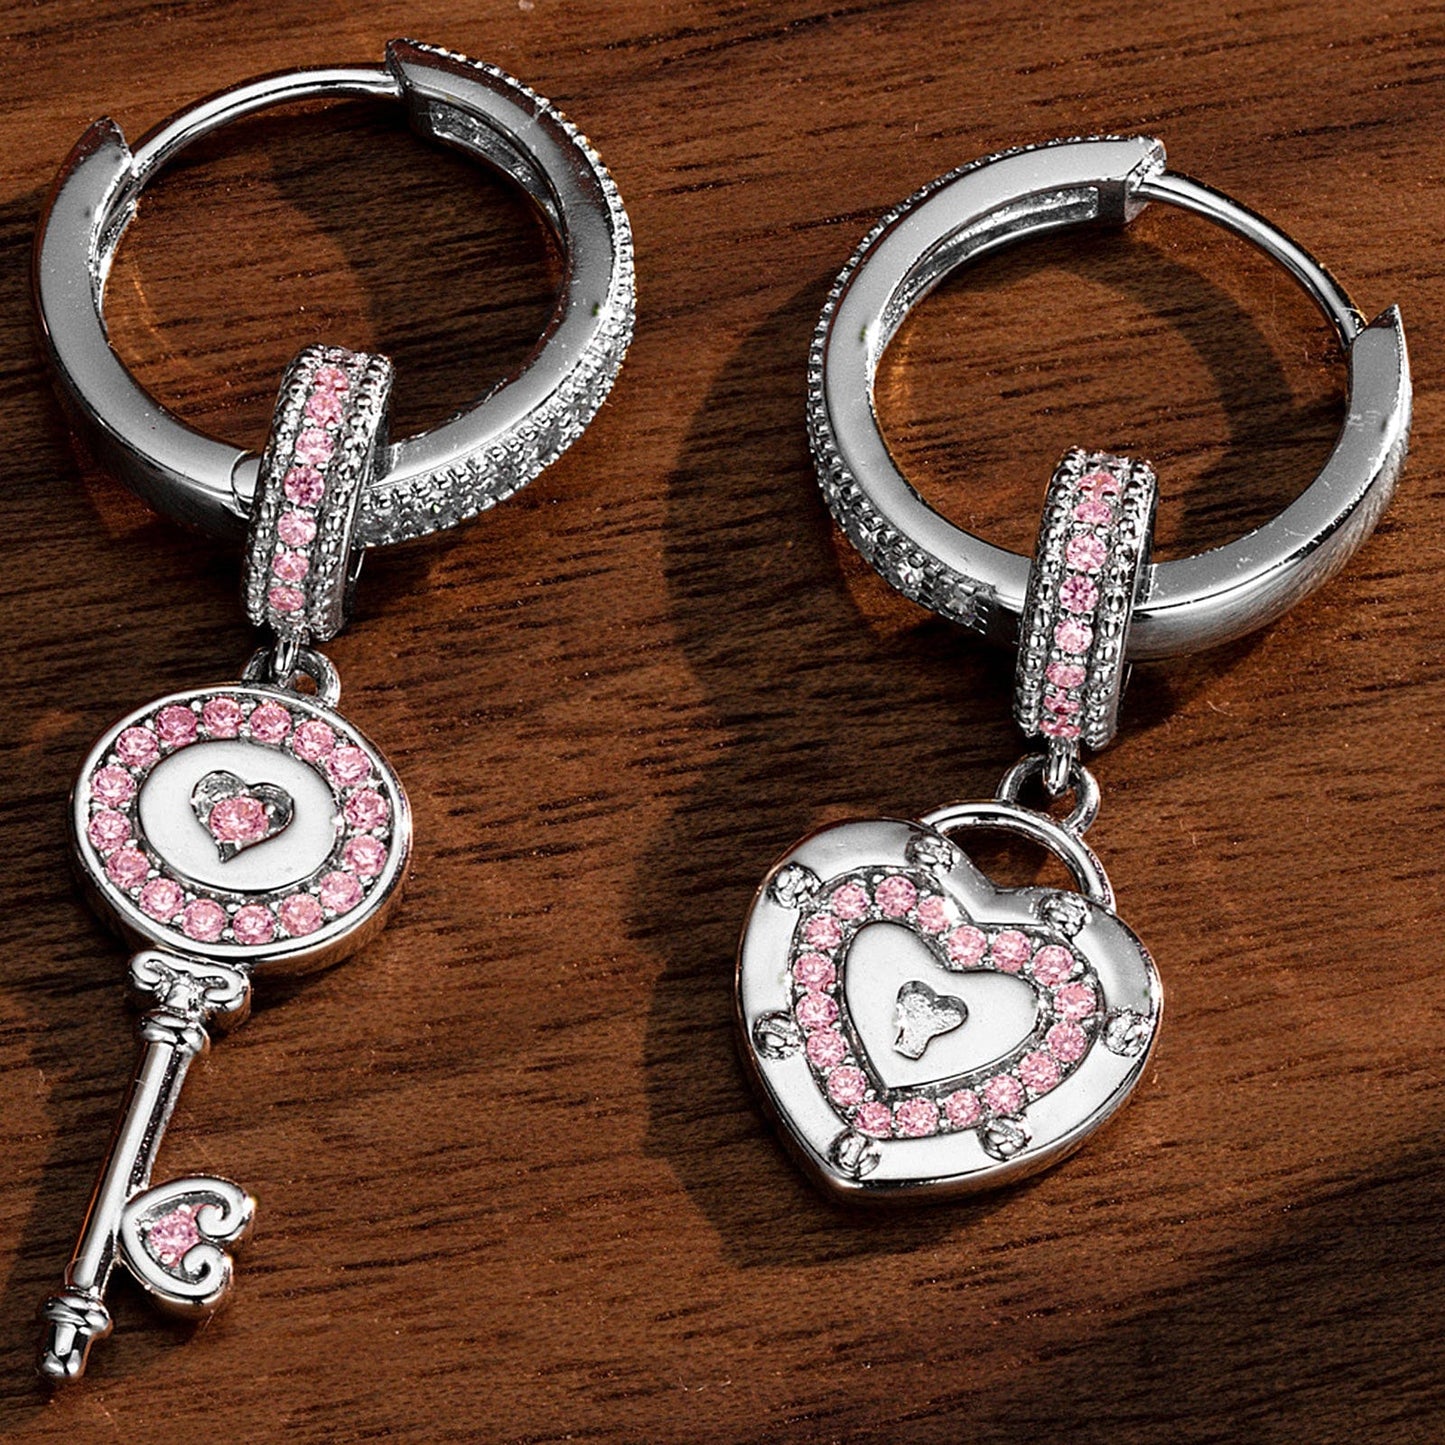 Sterling Silver Romantic Key to Heart Charms Earrings Set In White Gold Plated